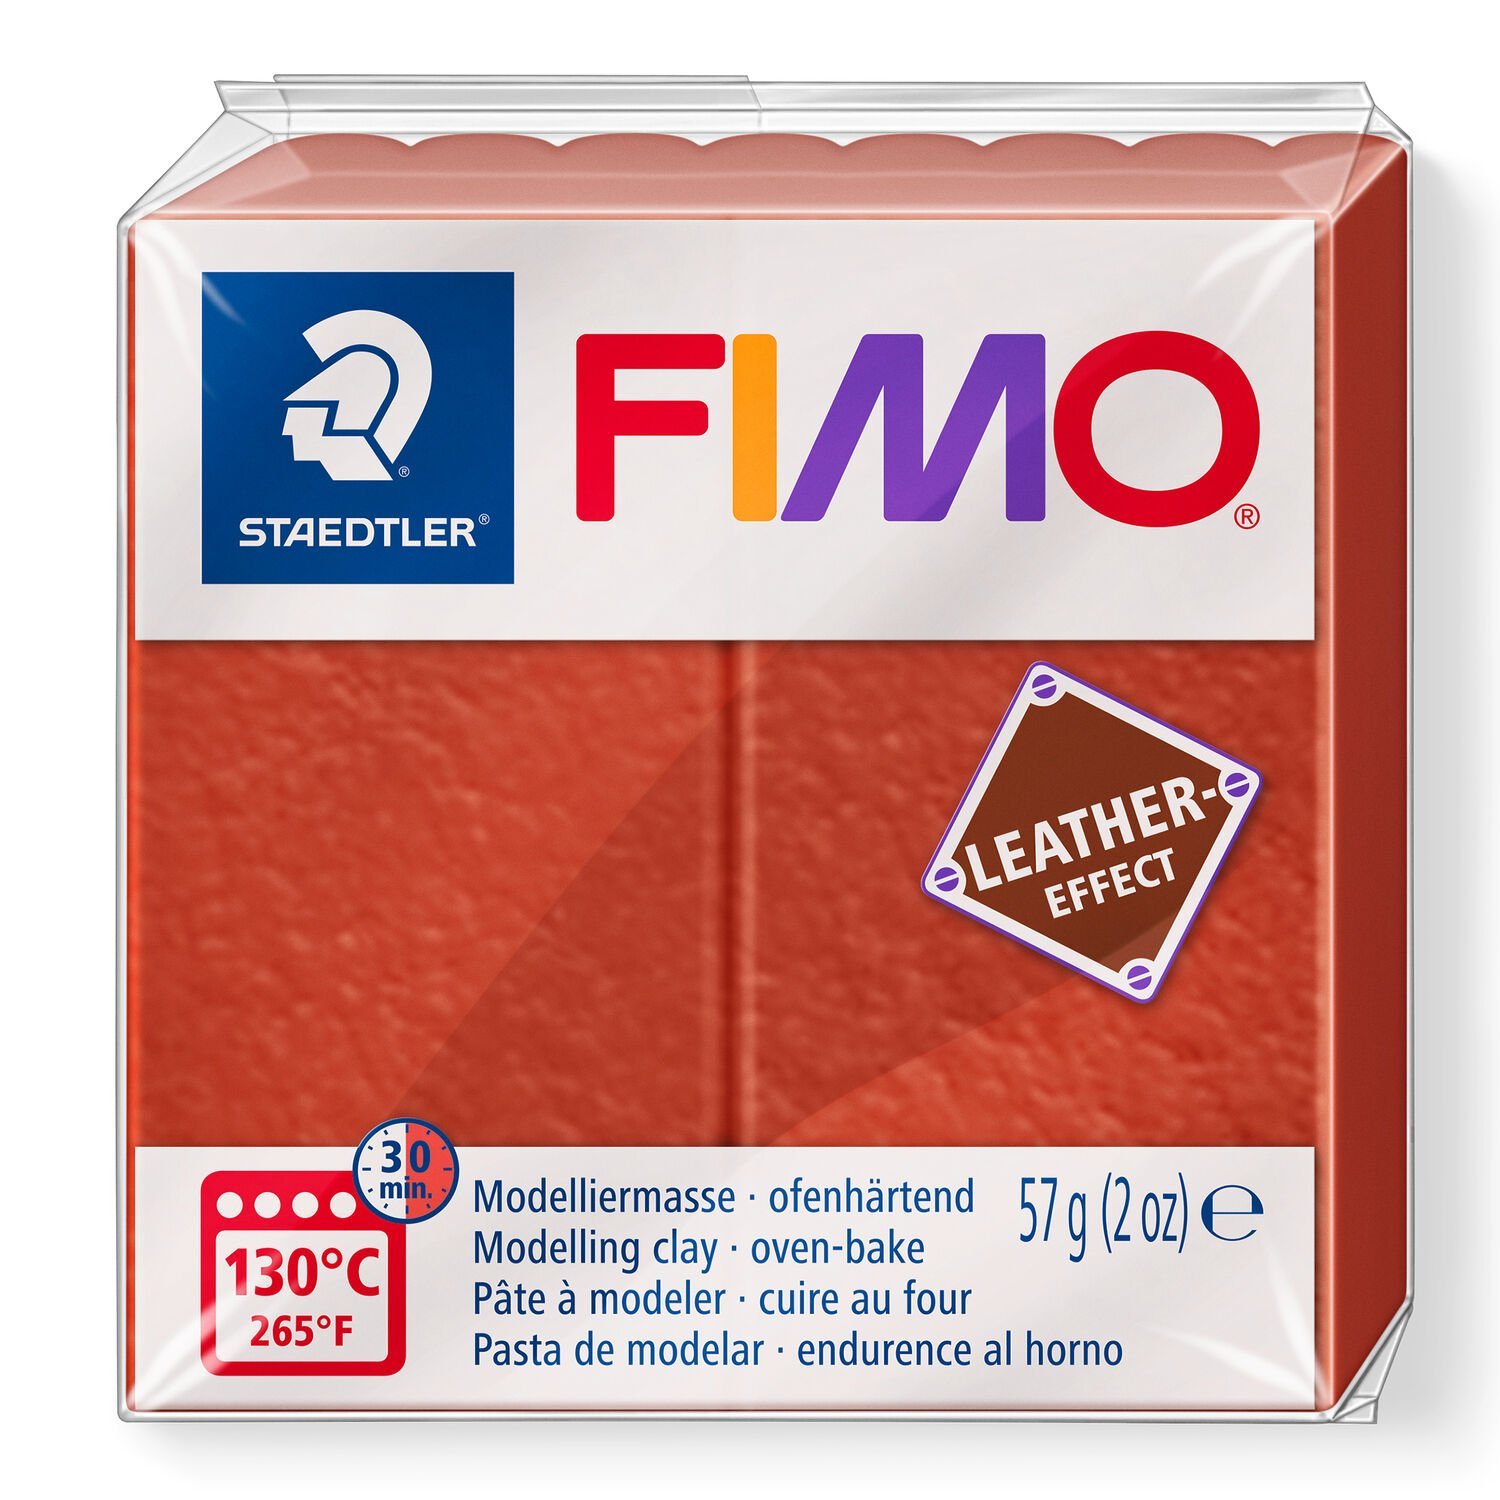 FIMO® leather-effect 8010 - Oven-bake modelling clay